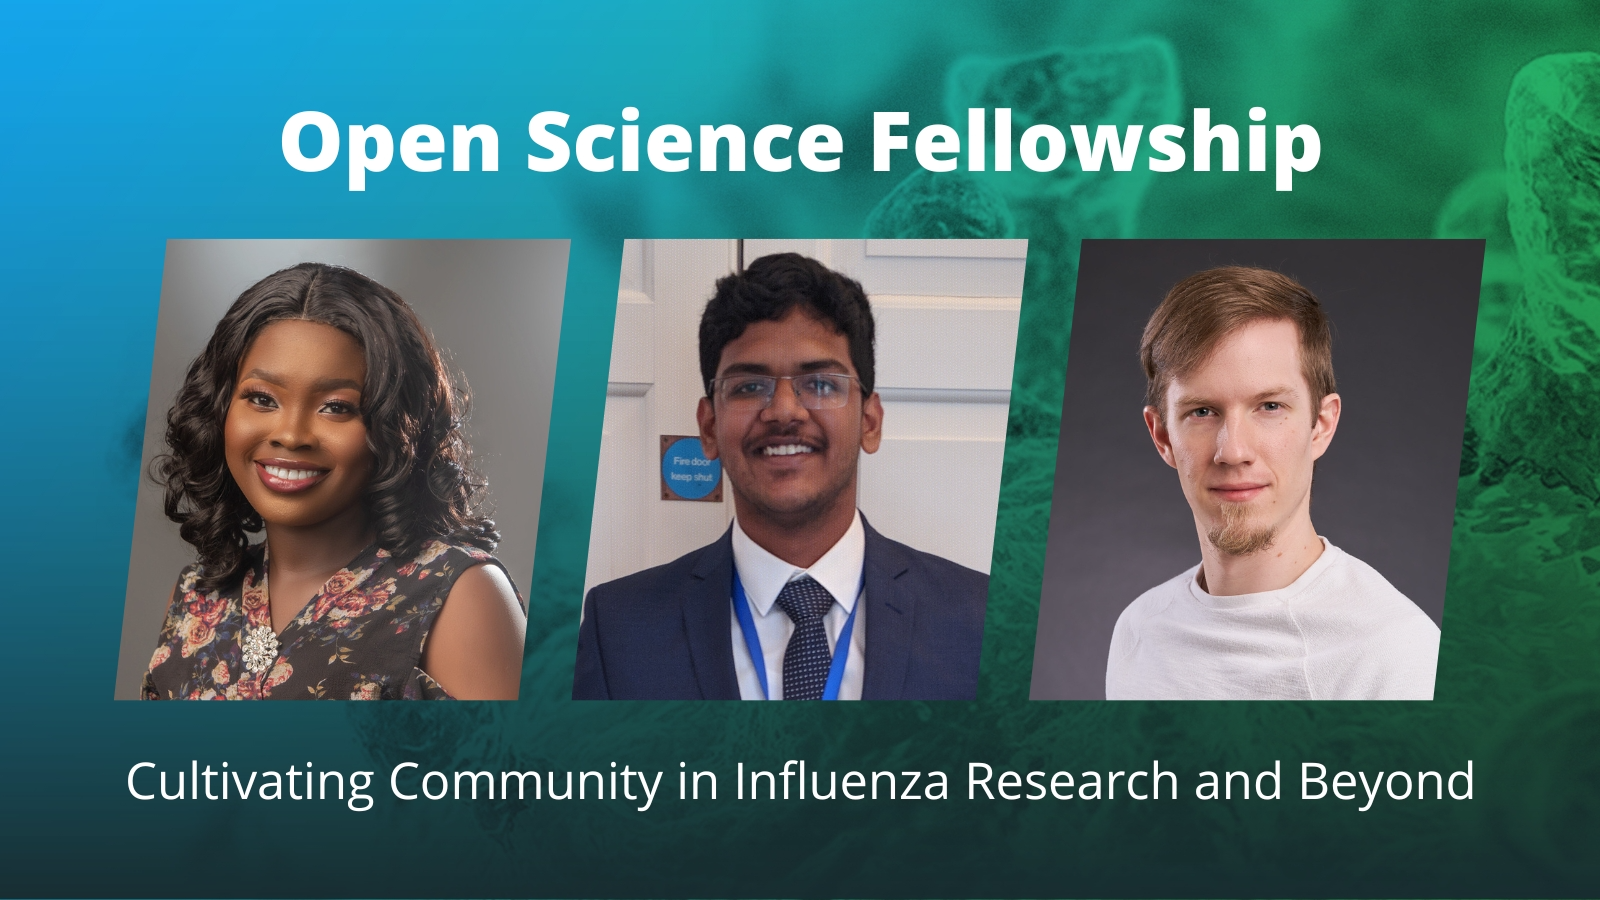 Text: Open Science Fellowship - Cultivating Community in Influenza Research and Beyond (with photos of three fellows)